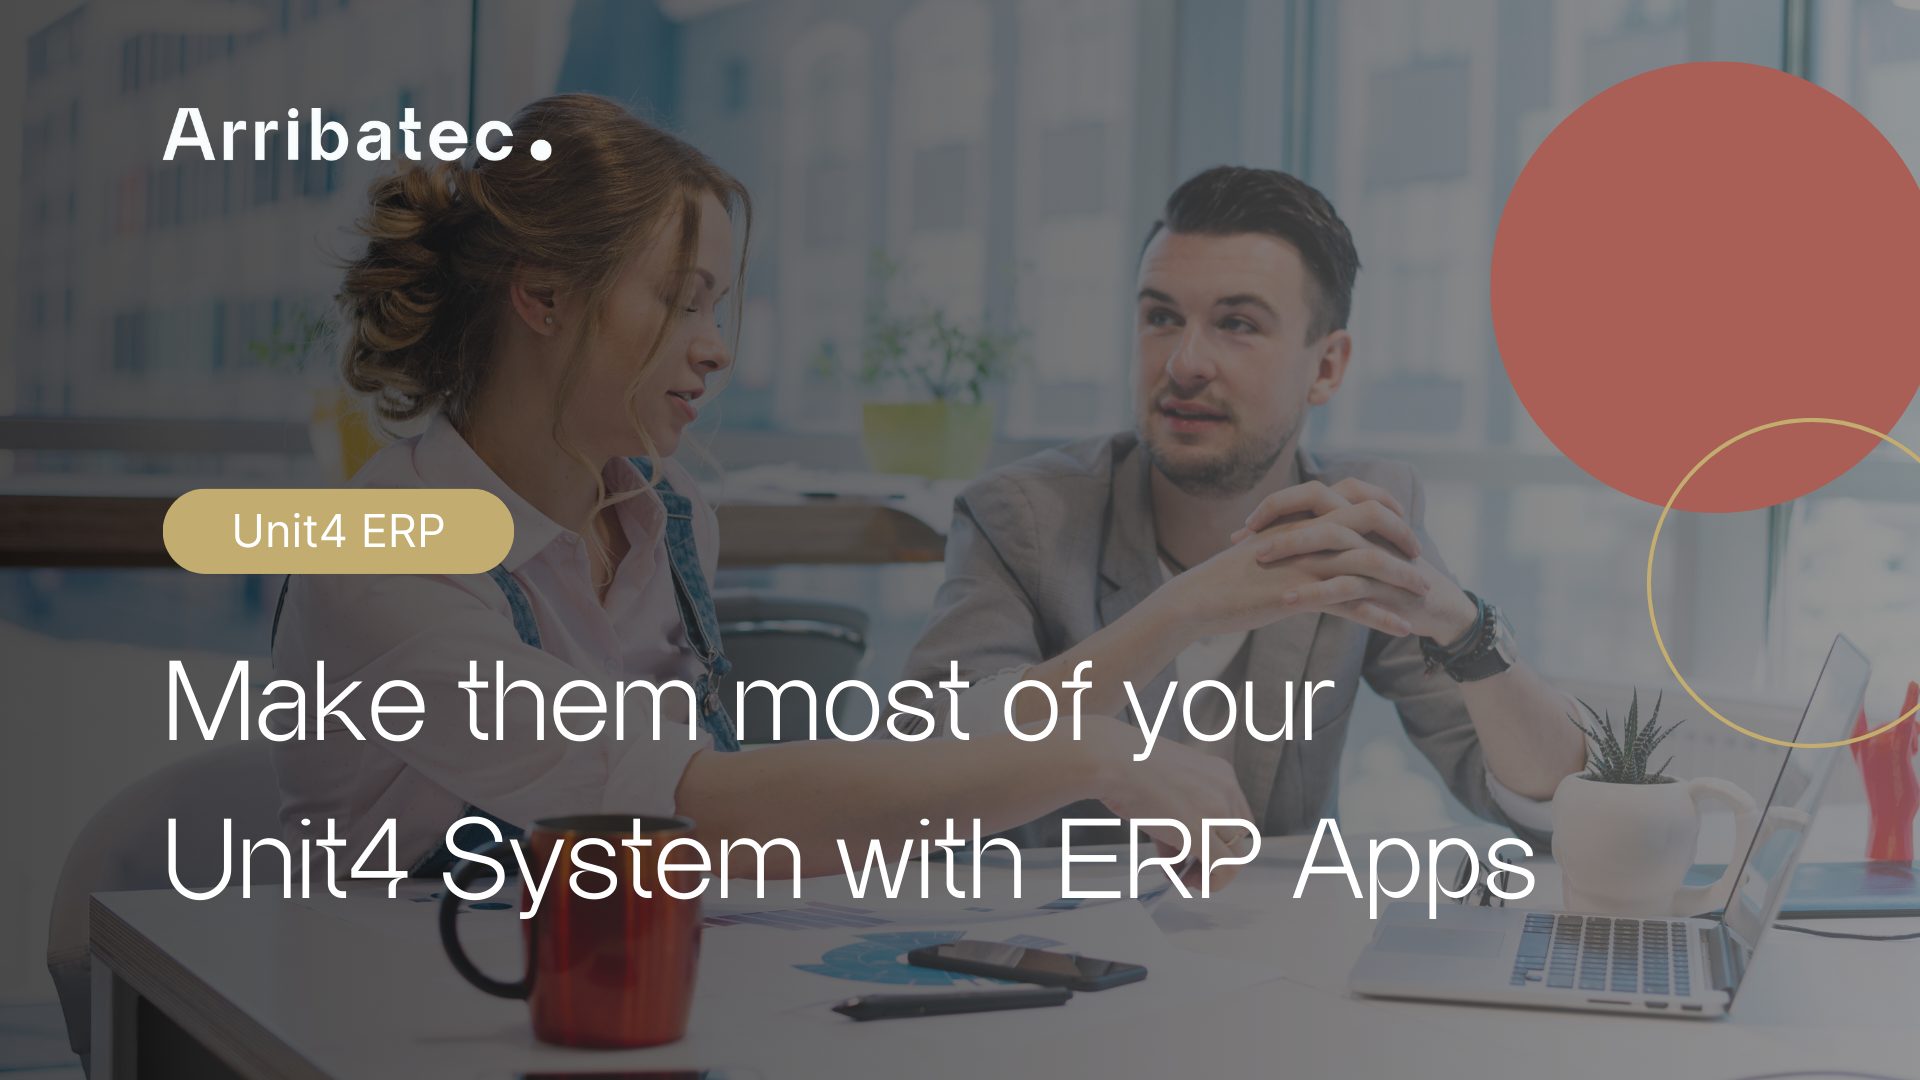 Save time & money by enabling your customers and/or suppliers to manage their account via our self-service portals that are integrated with Unit4 ERP.